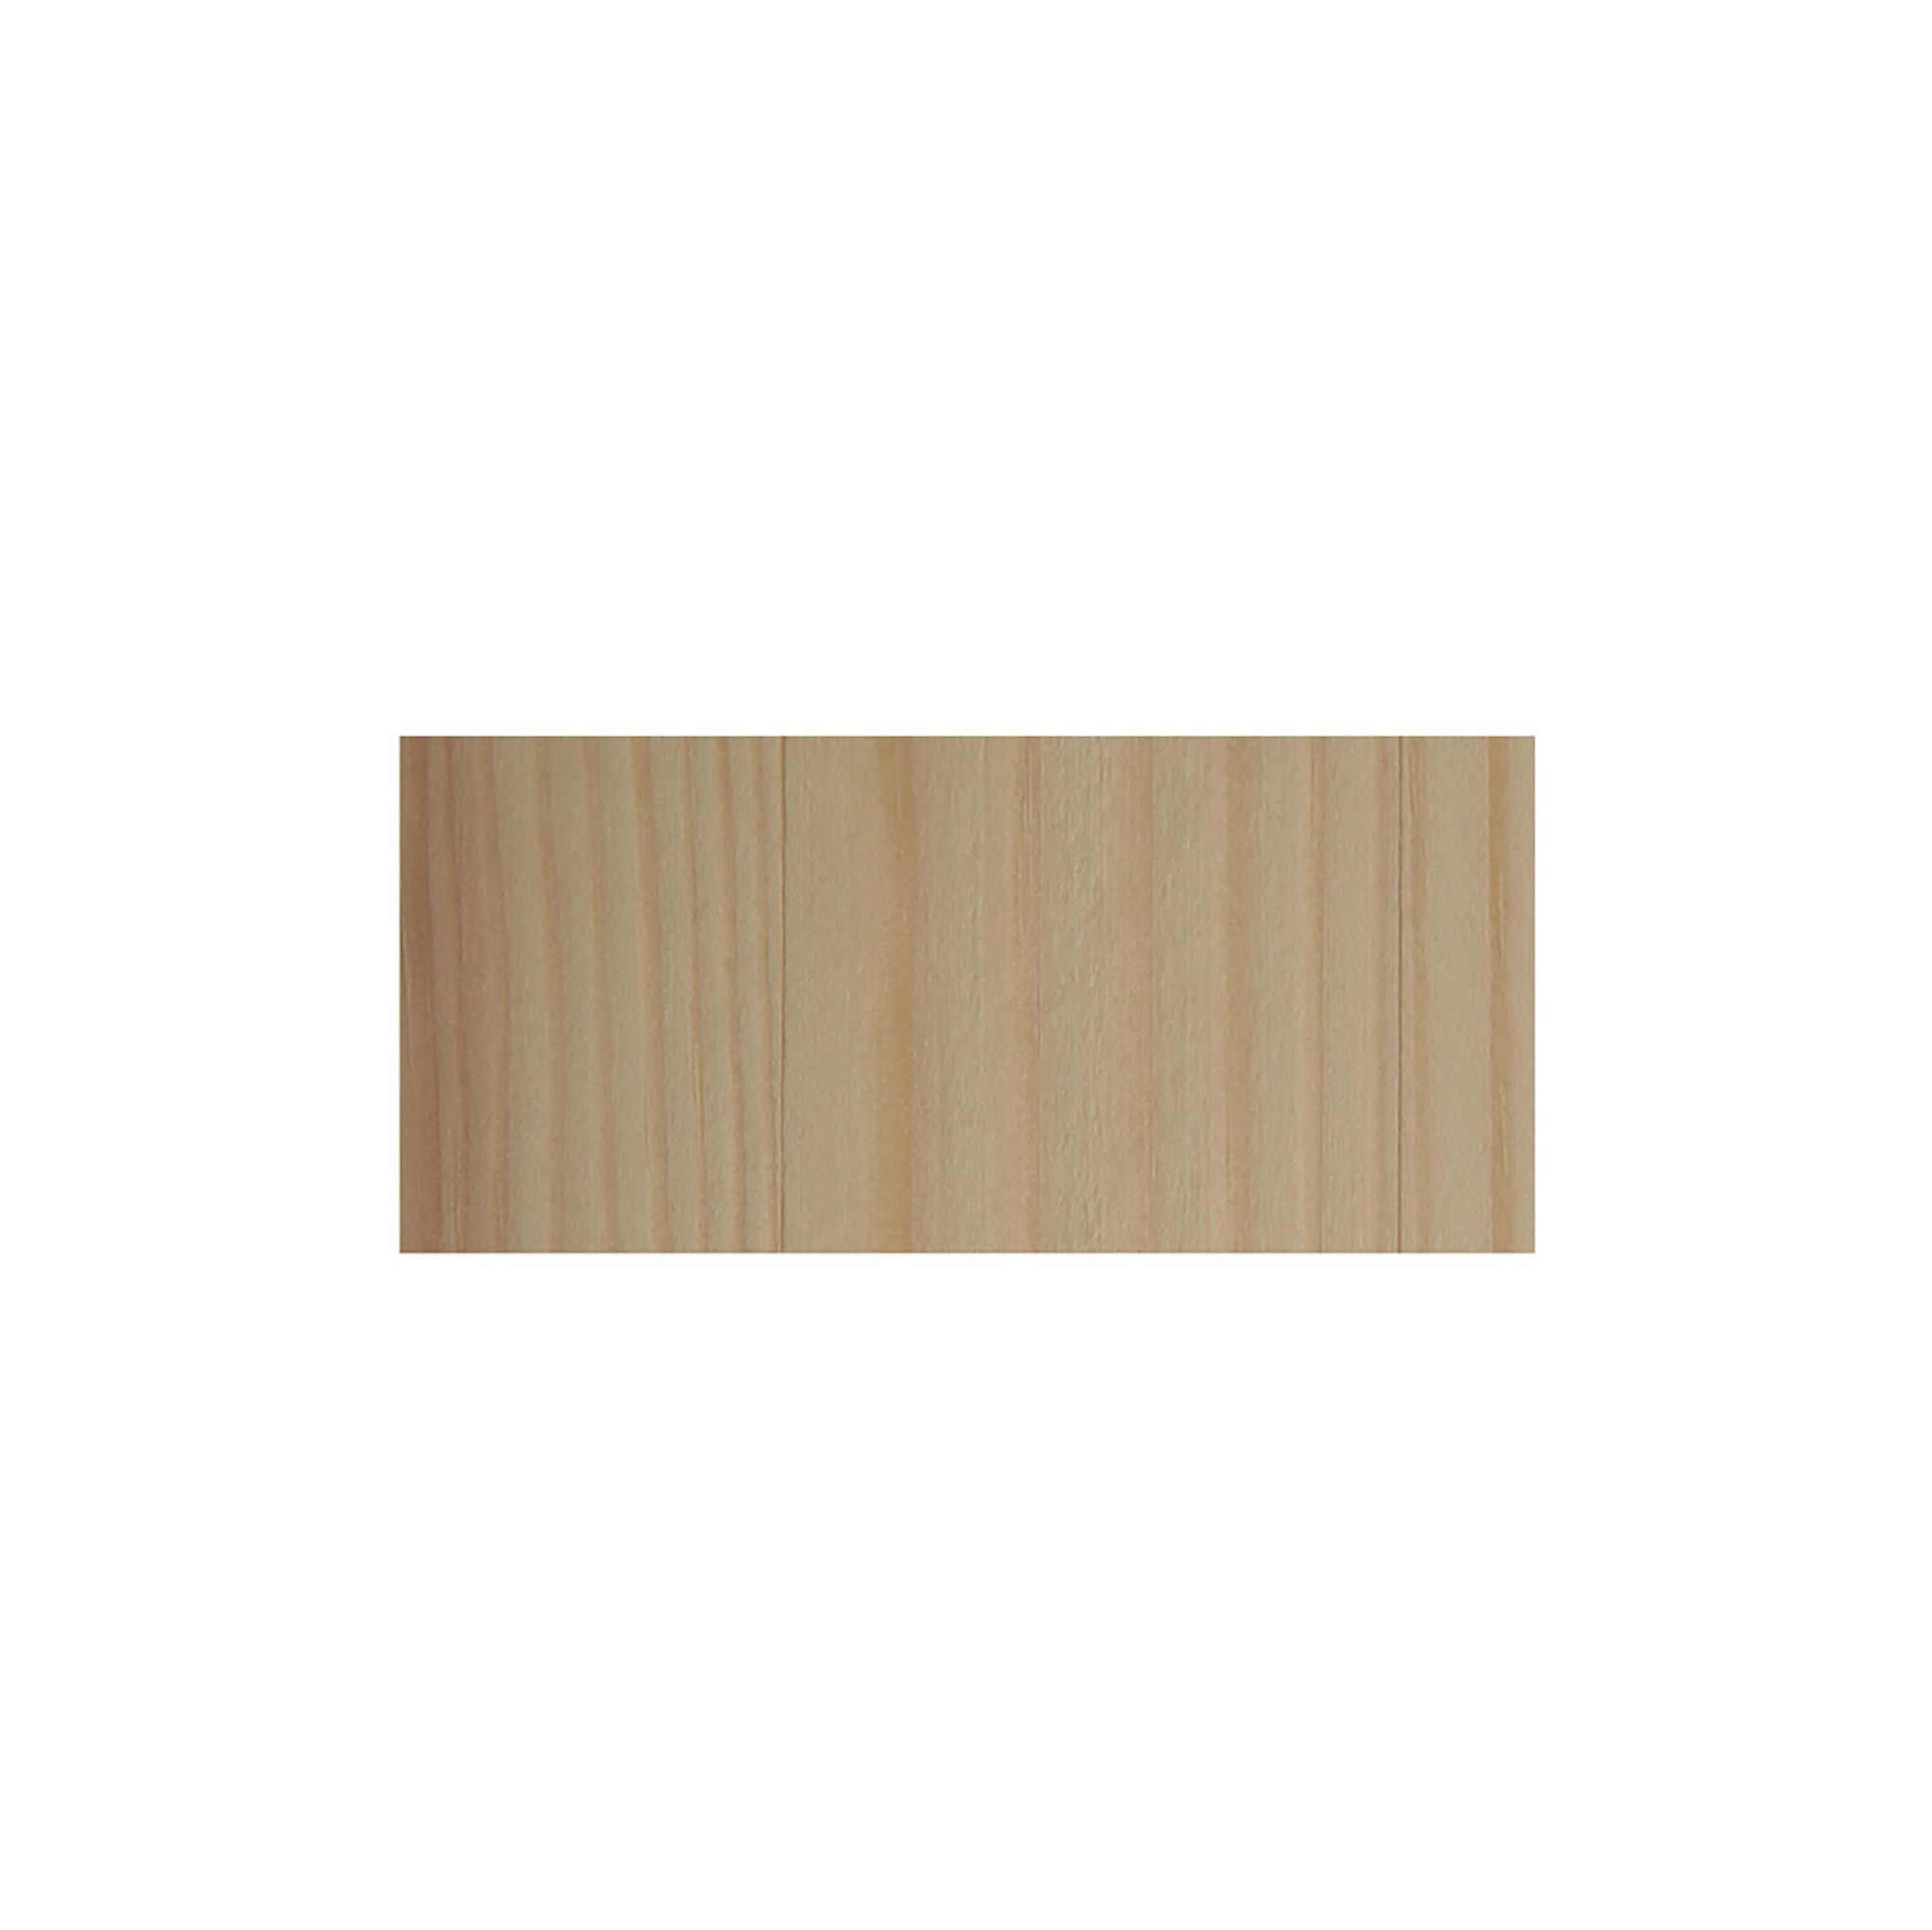 Cheshire Mouldings Smooth Planed Square edge Pine Stripwood (L)0.9m (W)36mm (T)21mm STPN58